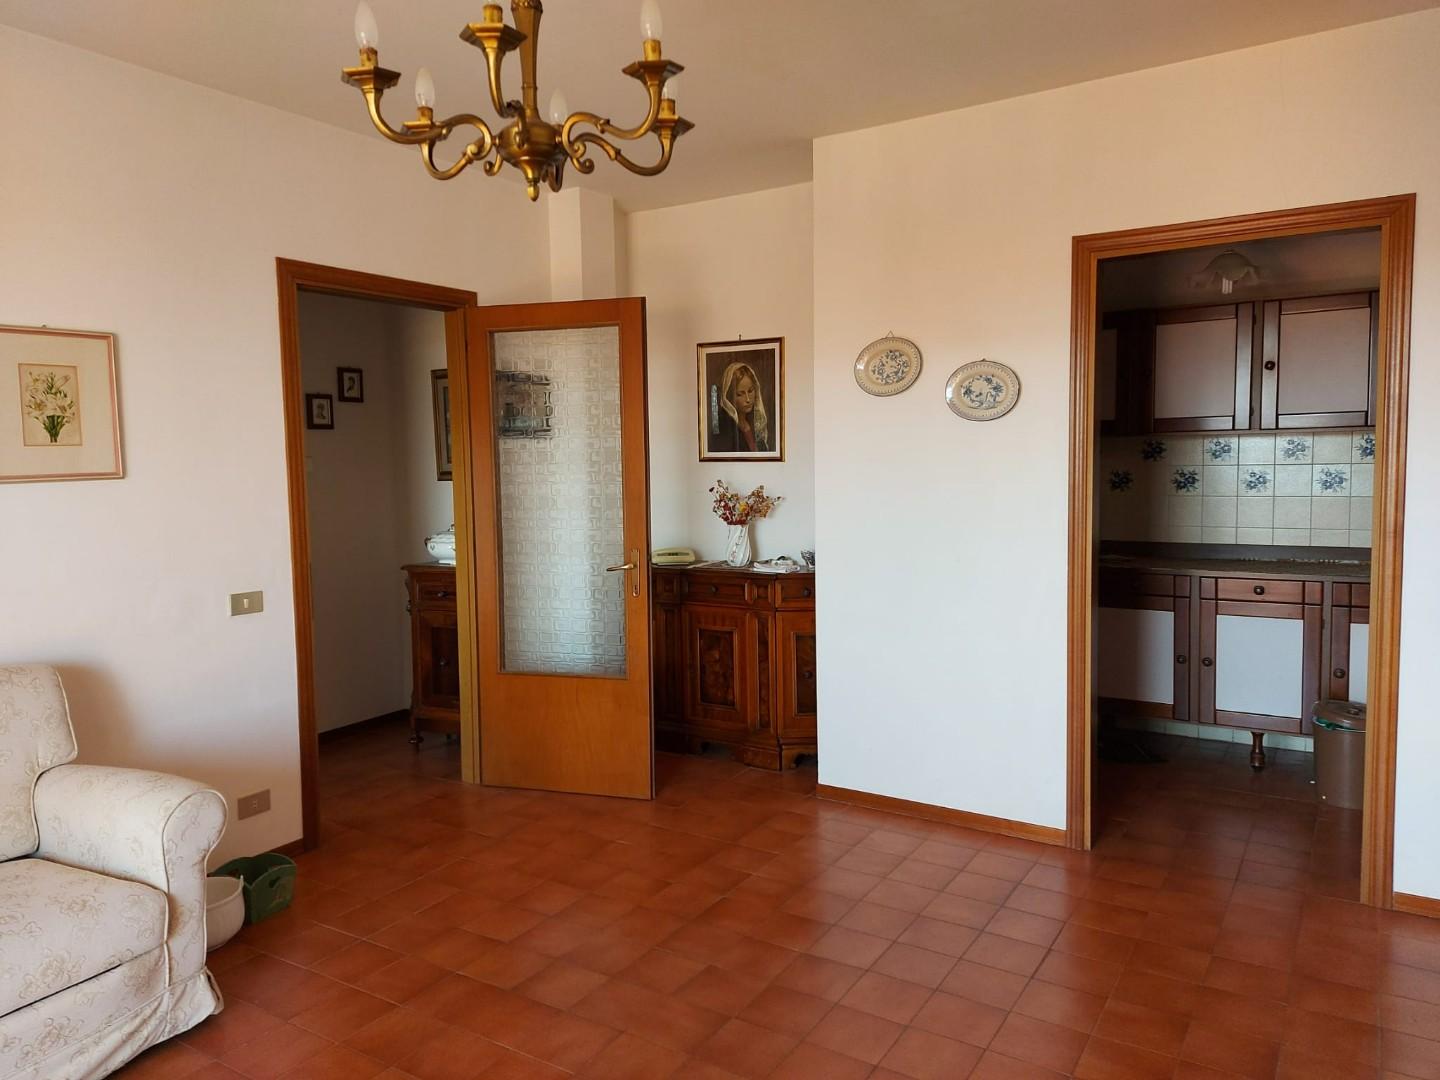 Apartment for sale in Sovicille (SI)